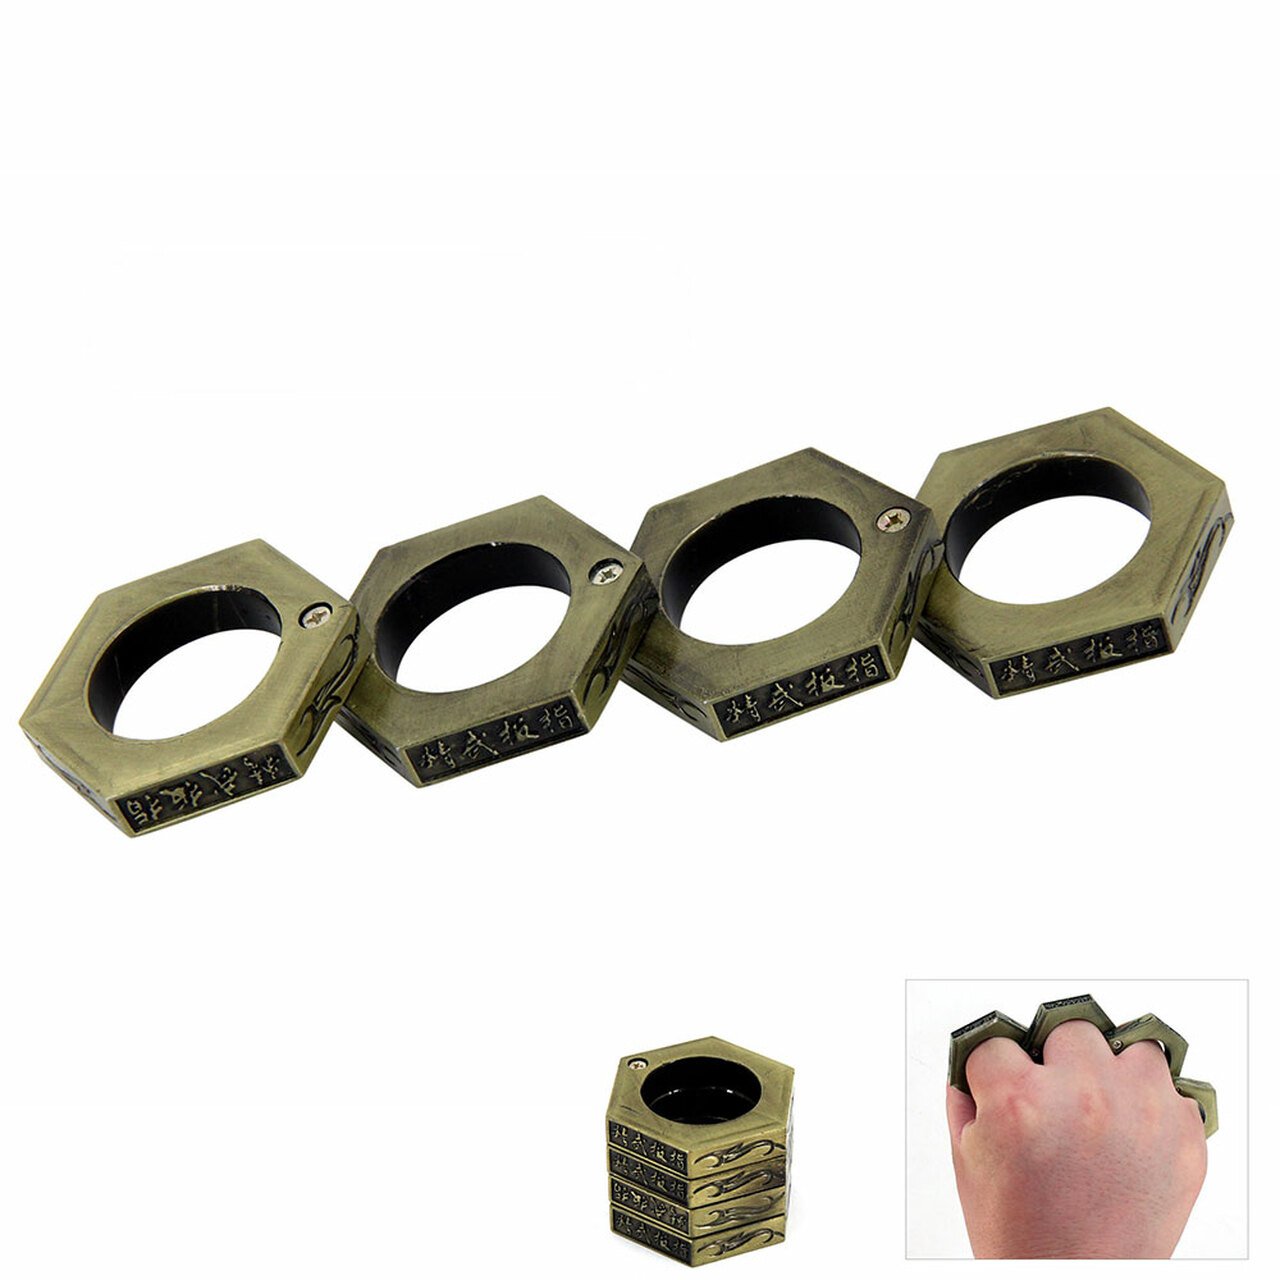 Hexagon Kung Fu Finger Magic Ring Self Defense Brass Knuckle Survival Tool FREE SHIPPING